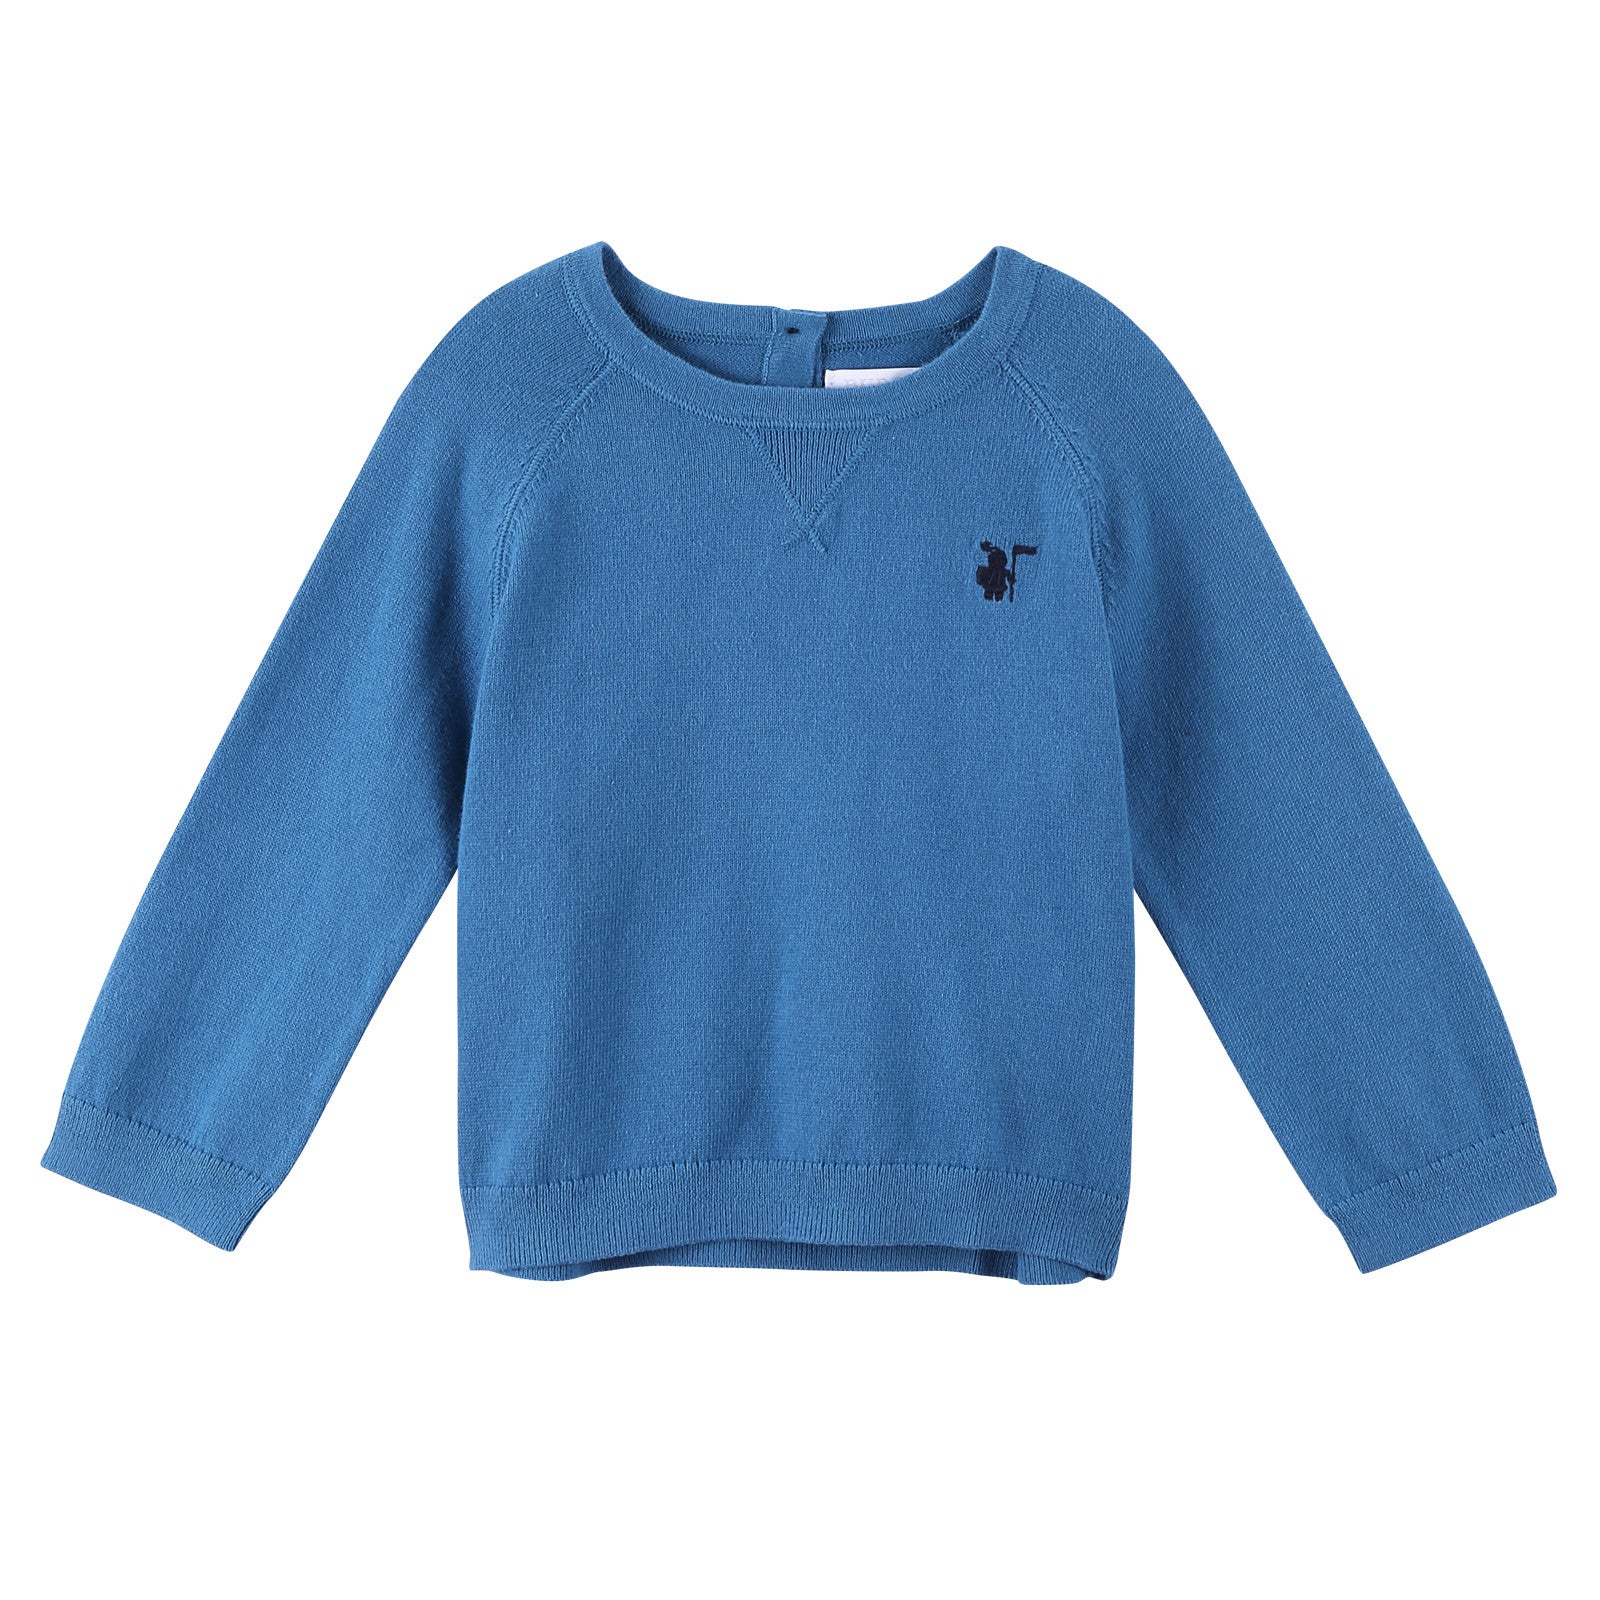 Baby Boys Light Blue Knitted Cotton Sweater - CÉMAROSE | Children's Fashion Store - 1